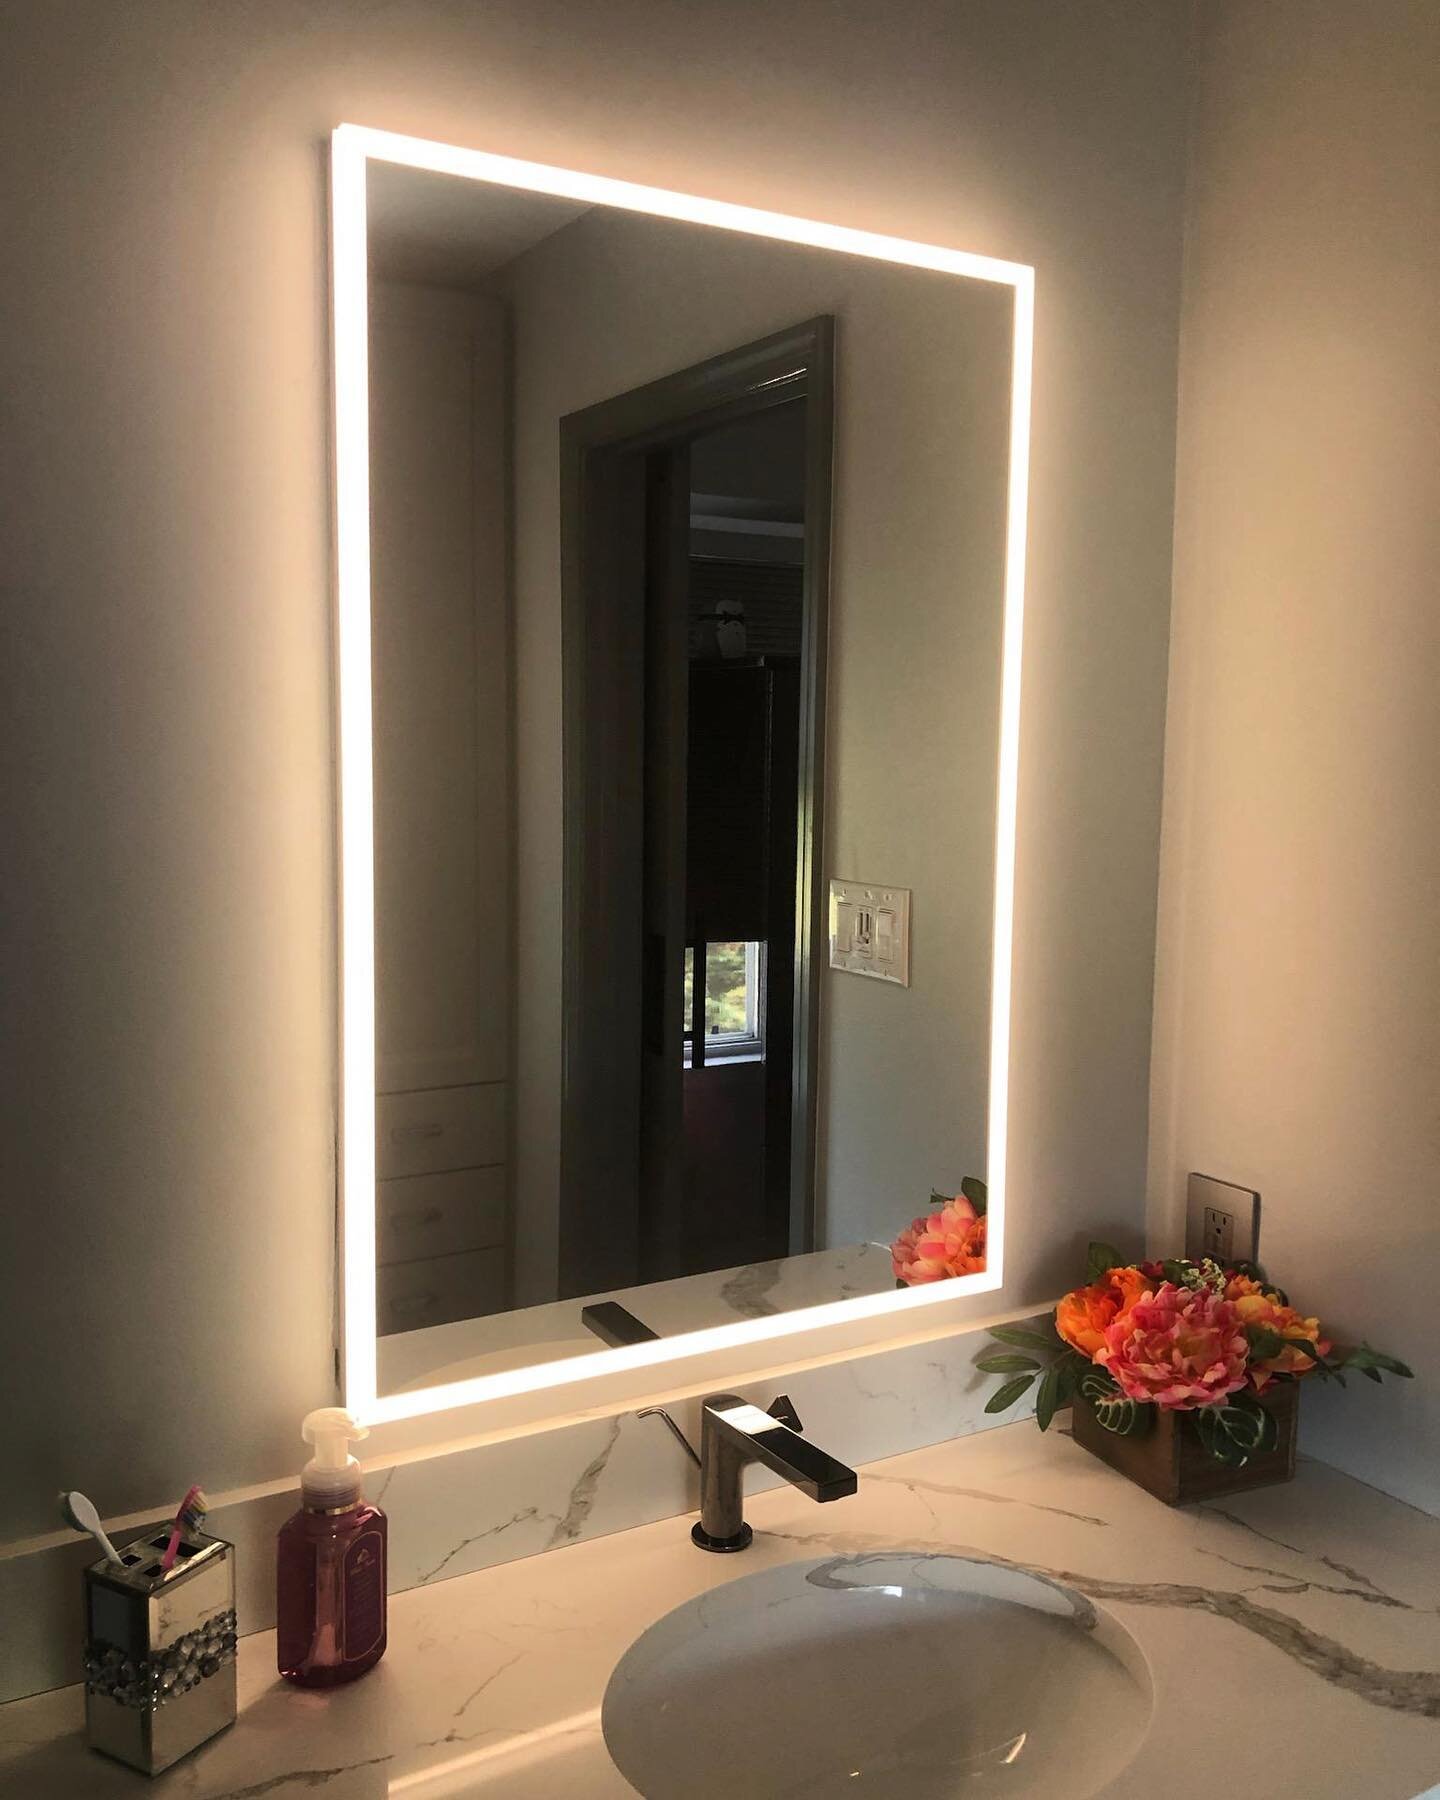 A moody little bathroom for this gloomy Monday.  The LED Halo mirror is by @fleurco.inc, available through Beebe&rsquo;s in Hamilton, who also supplied the faucet.  Gorgeous countertop by @cosmosmarblegranite.  Simple, classic design by @cabsbyamyand